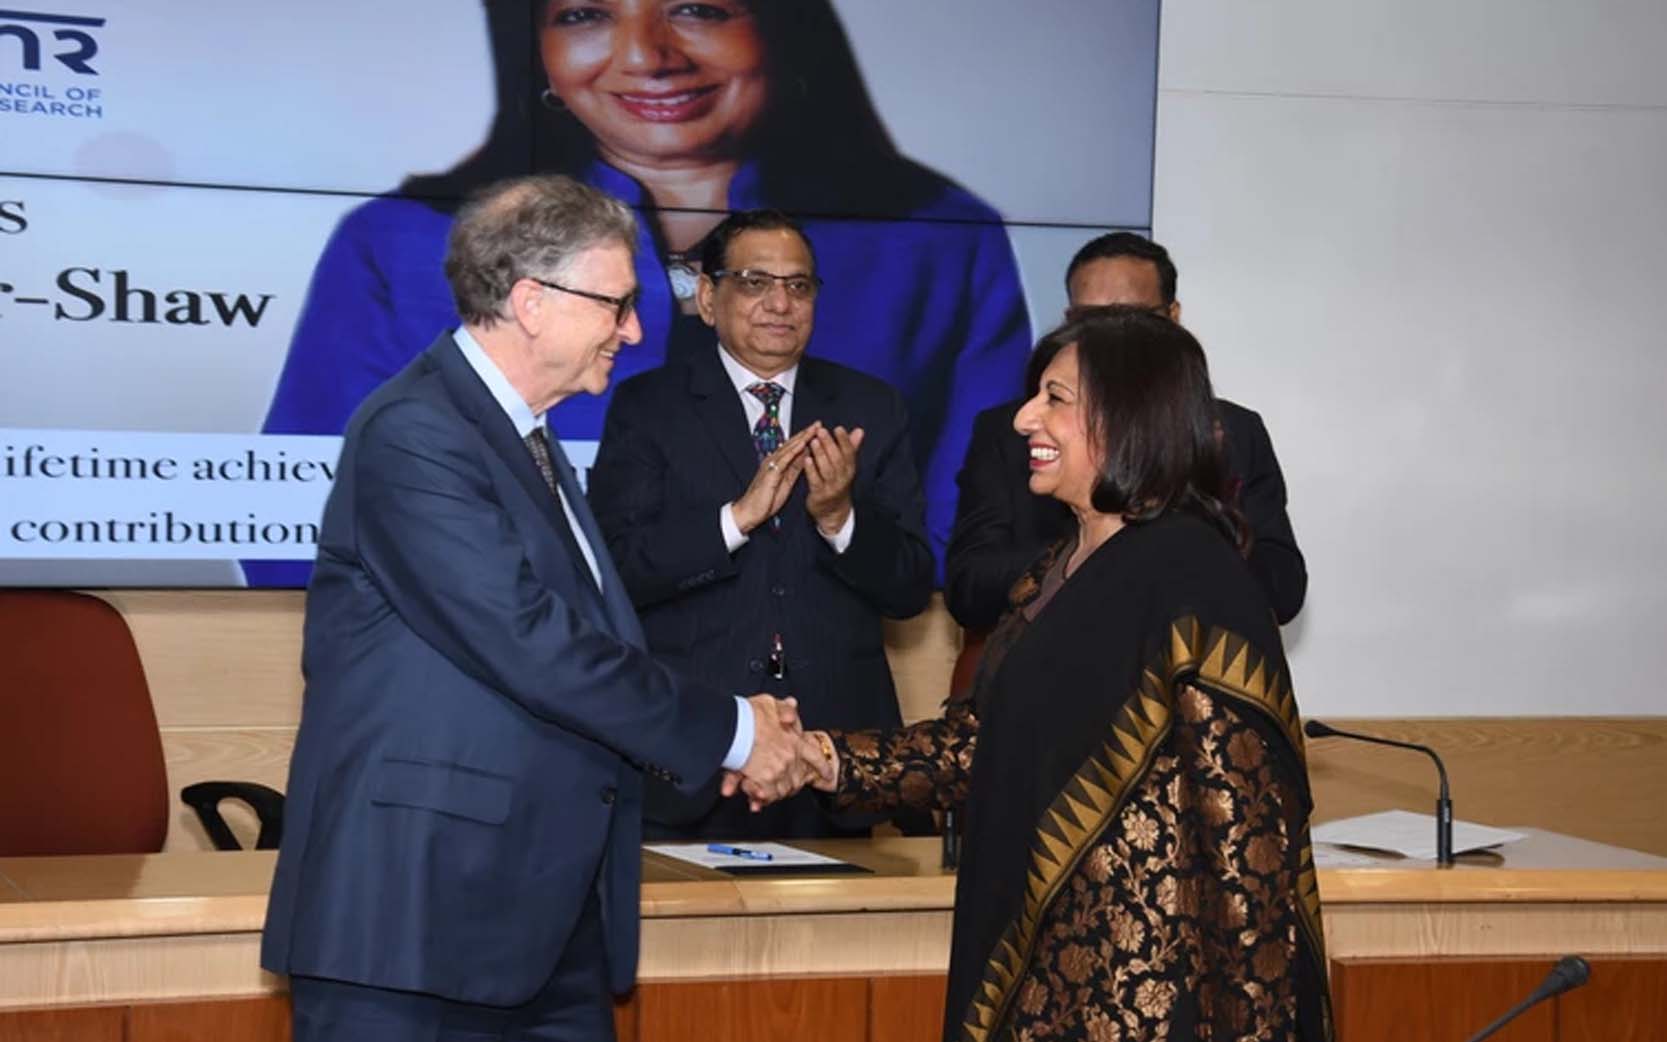 Conferred with the Lifetime Achievement Award for Outstanding Achievement in Healthcare by the Indian Council of Medical Research (ICMR) in 2019